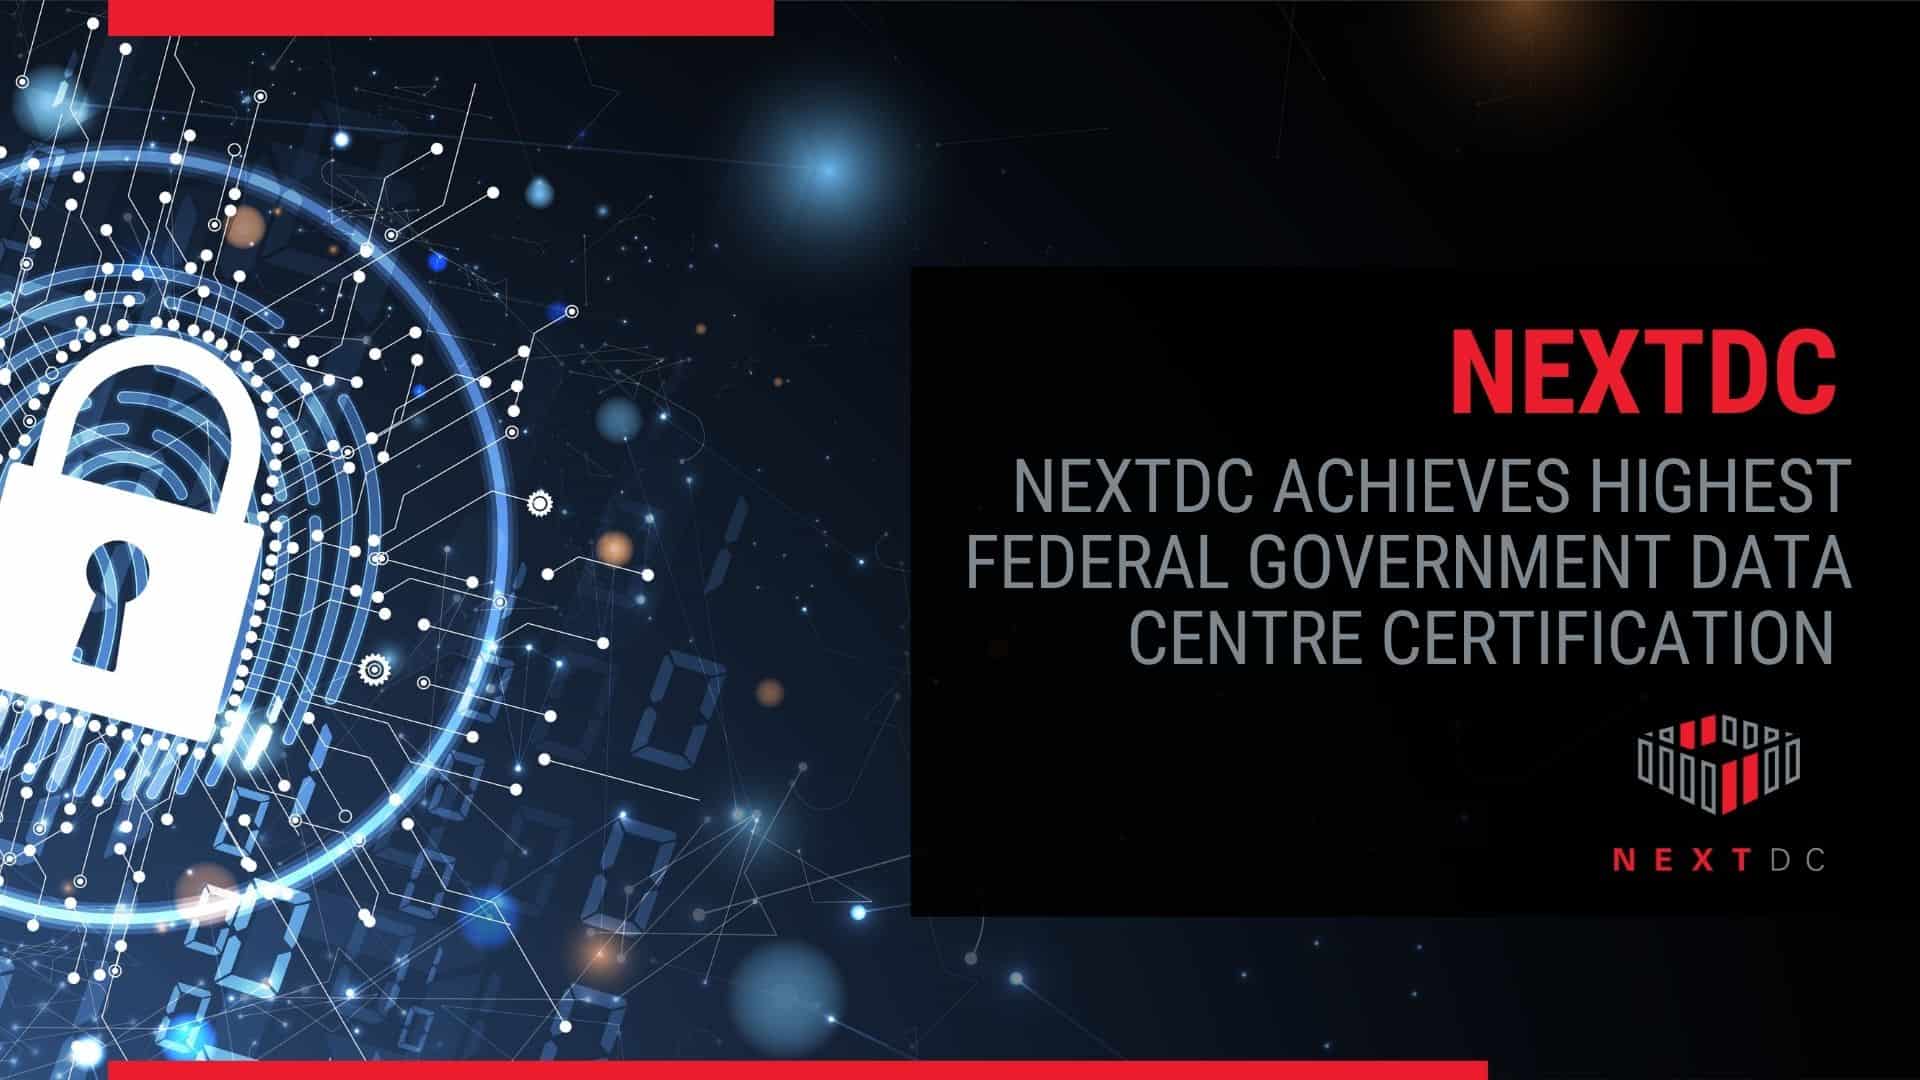 Australian Federal Government recognises NEXTDC as ‘Certified Strategic' provider to secure sovereign data